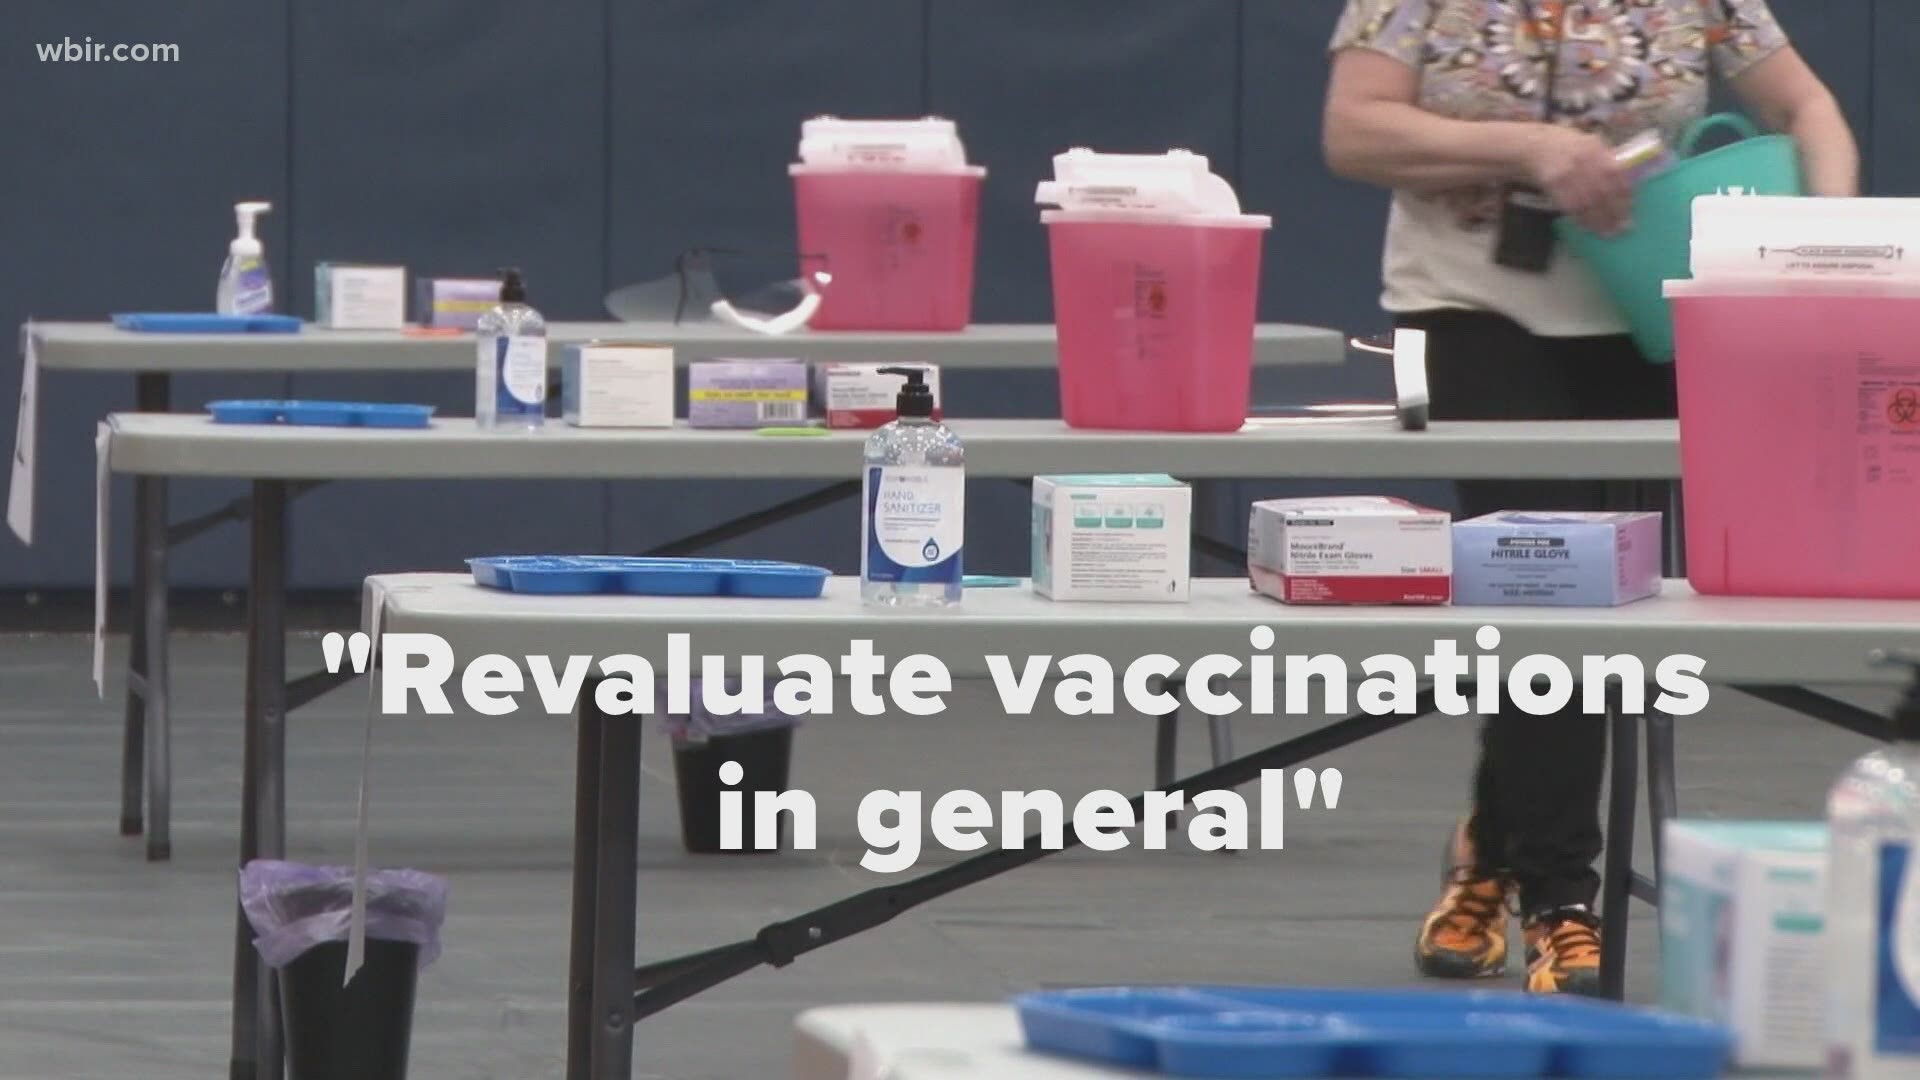 We're hearing more from East Tennesseans following the state's decision to step back from immunization messaging for young people.